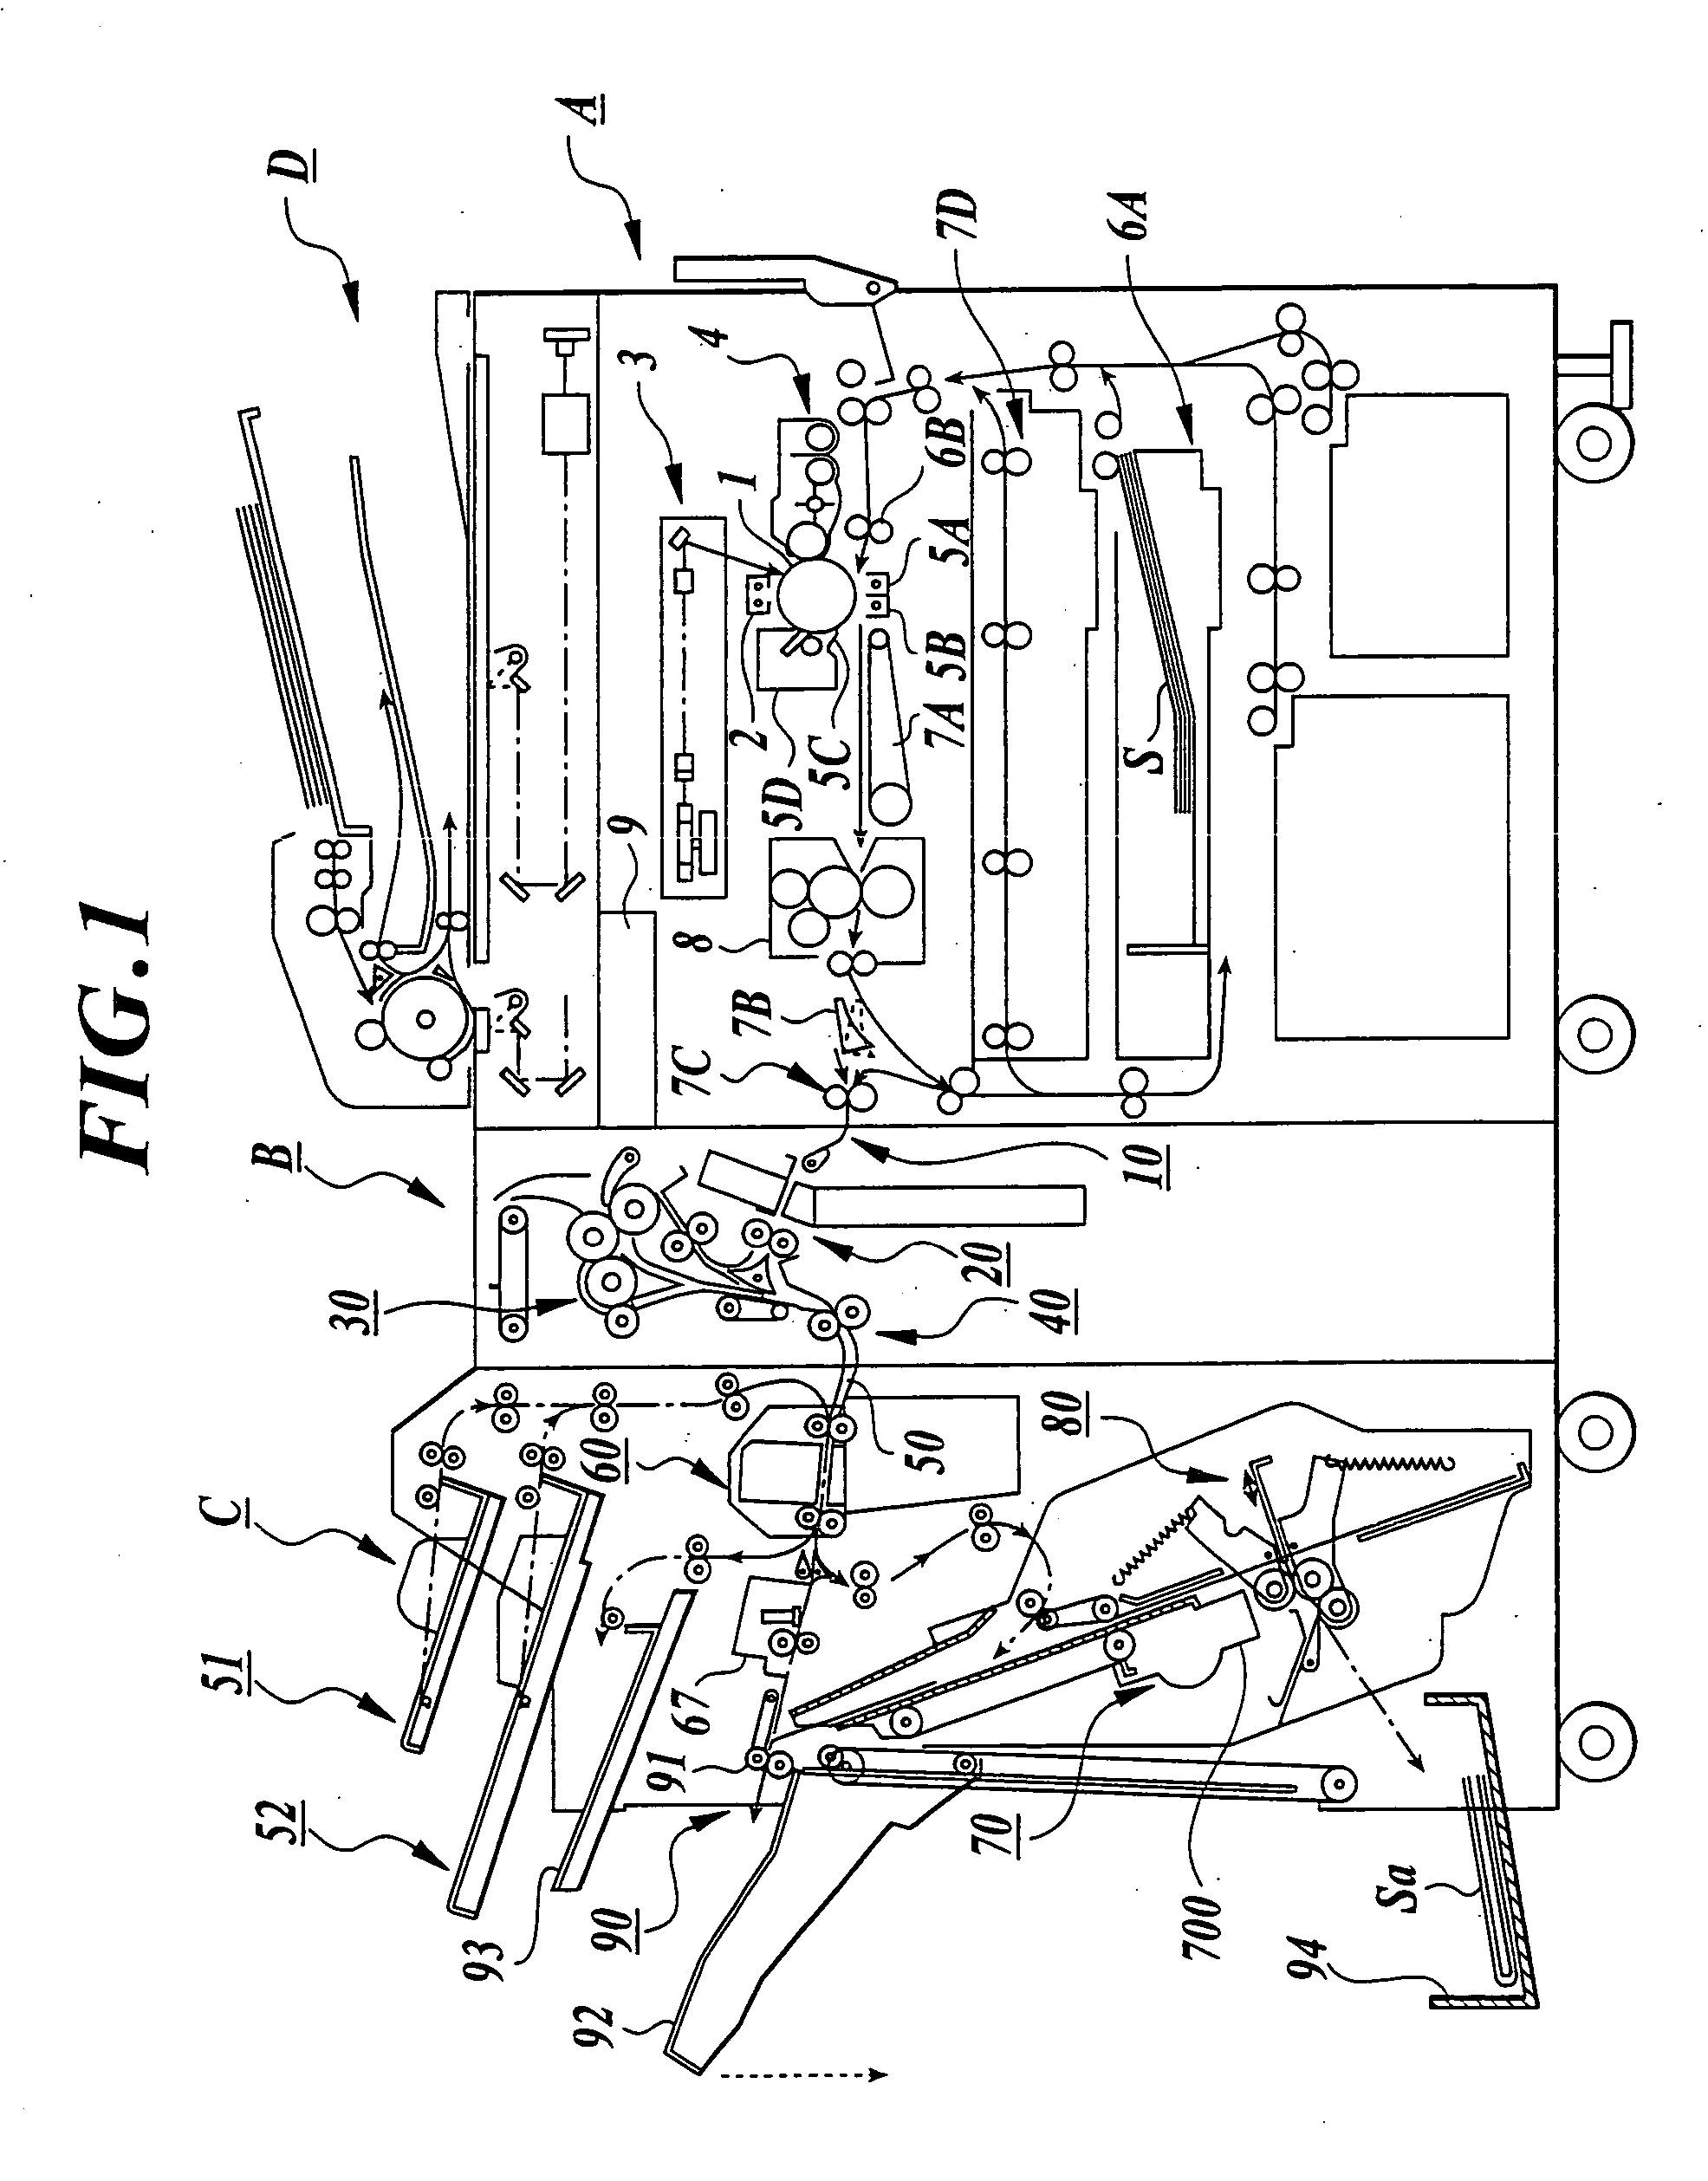 Sheet finisher, sheet processing apparatus, image forming system and methods for the same